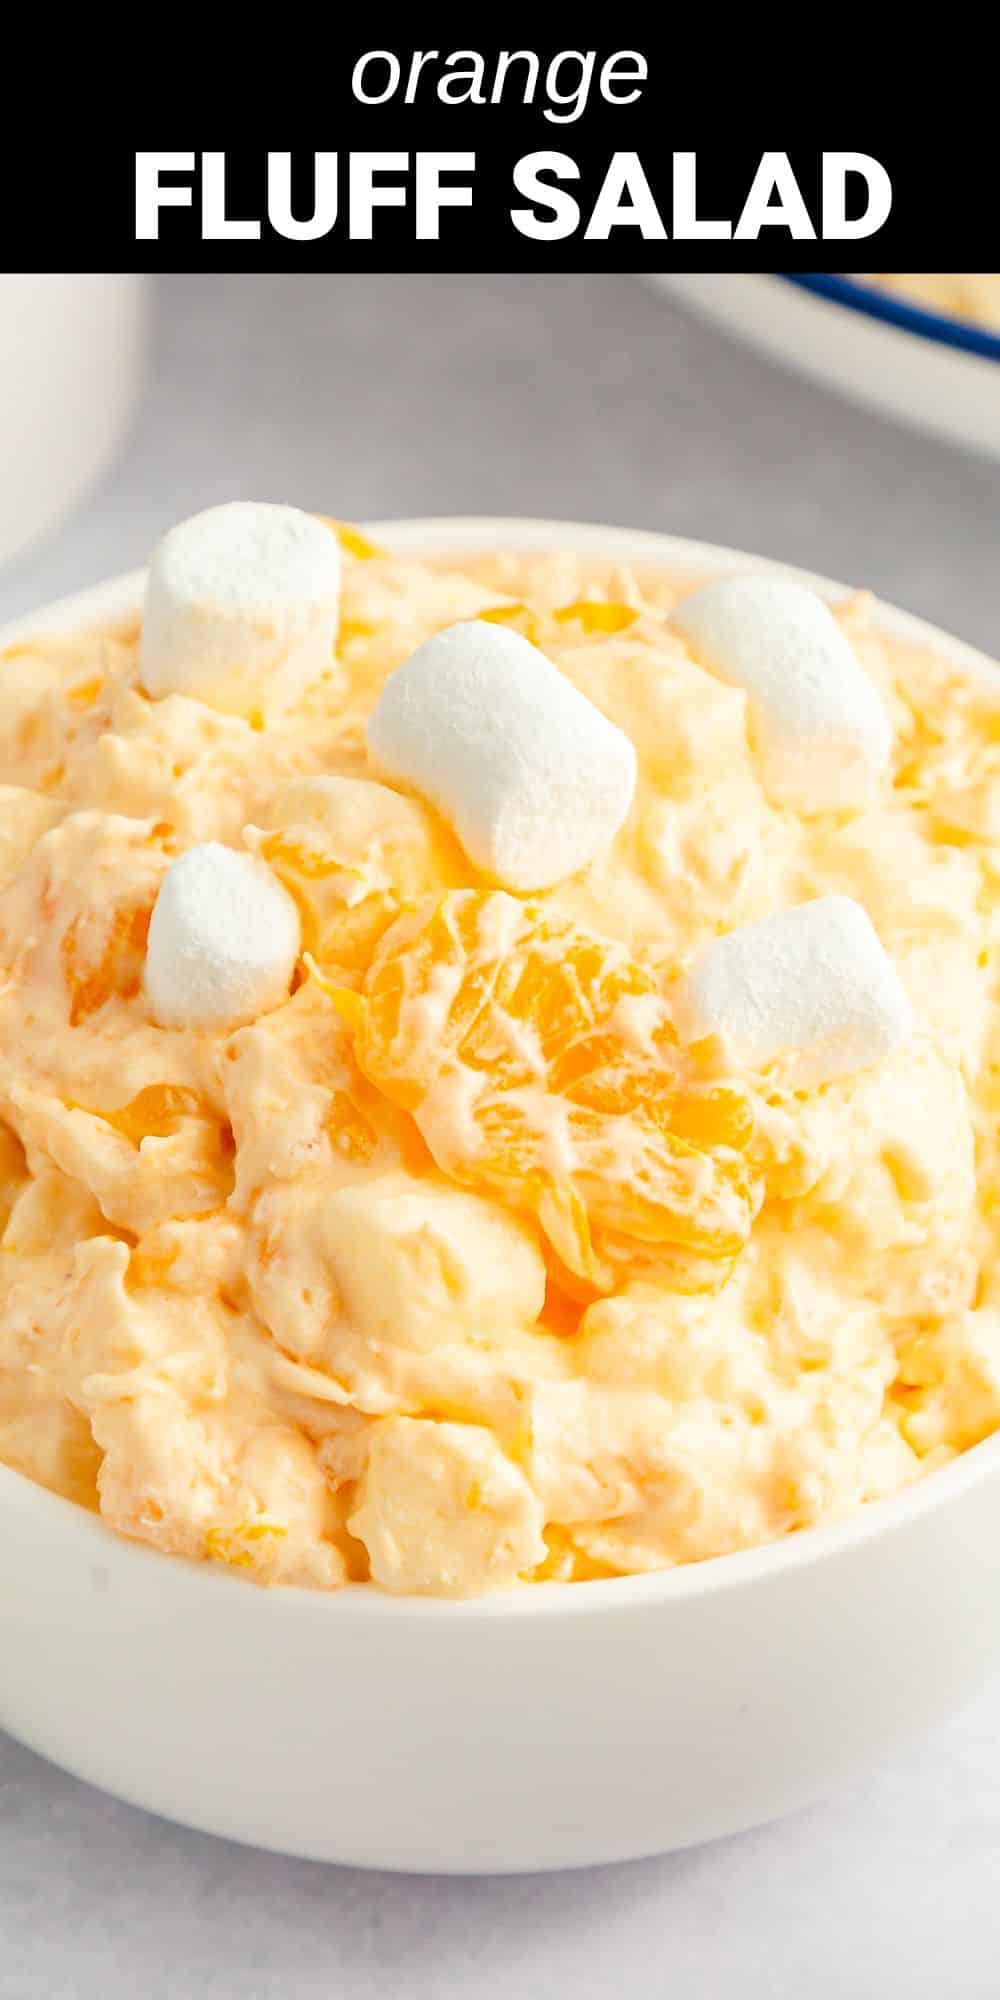 This Orange Fluff Salad is a sweet, creamy and fruity retro-style dessert salad that's extremely easy to make and always a crowd favorite. With juicy mandarin oranges, fluffy marshmallows and tangy crushed pineapple, it has a unique creamsicle flavor that'll have everyone coming back for more.